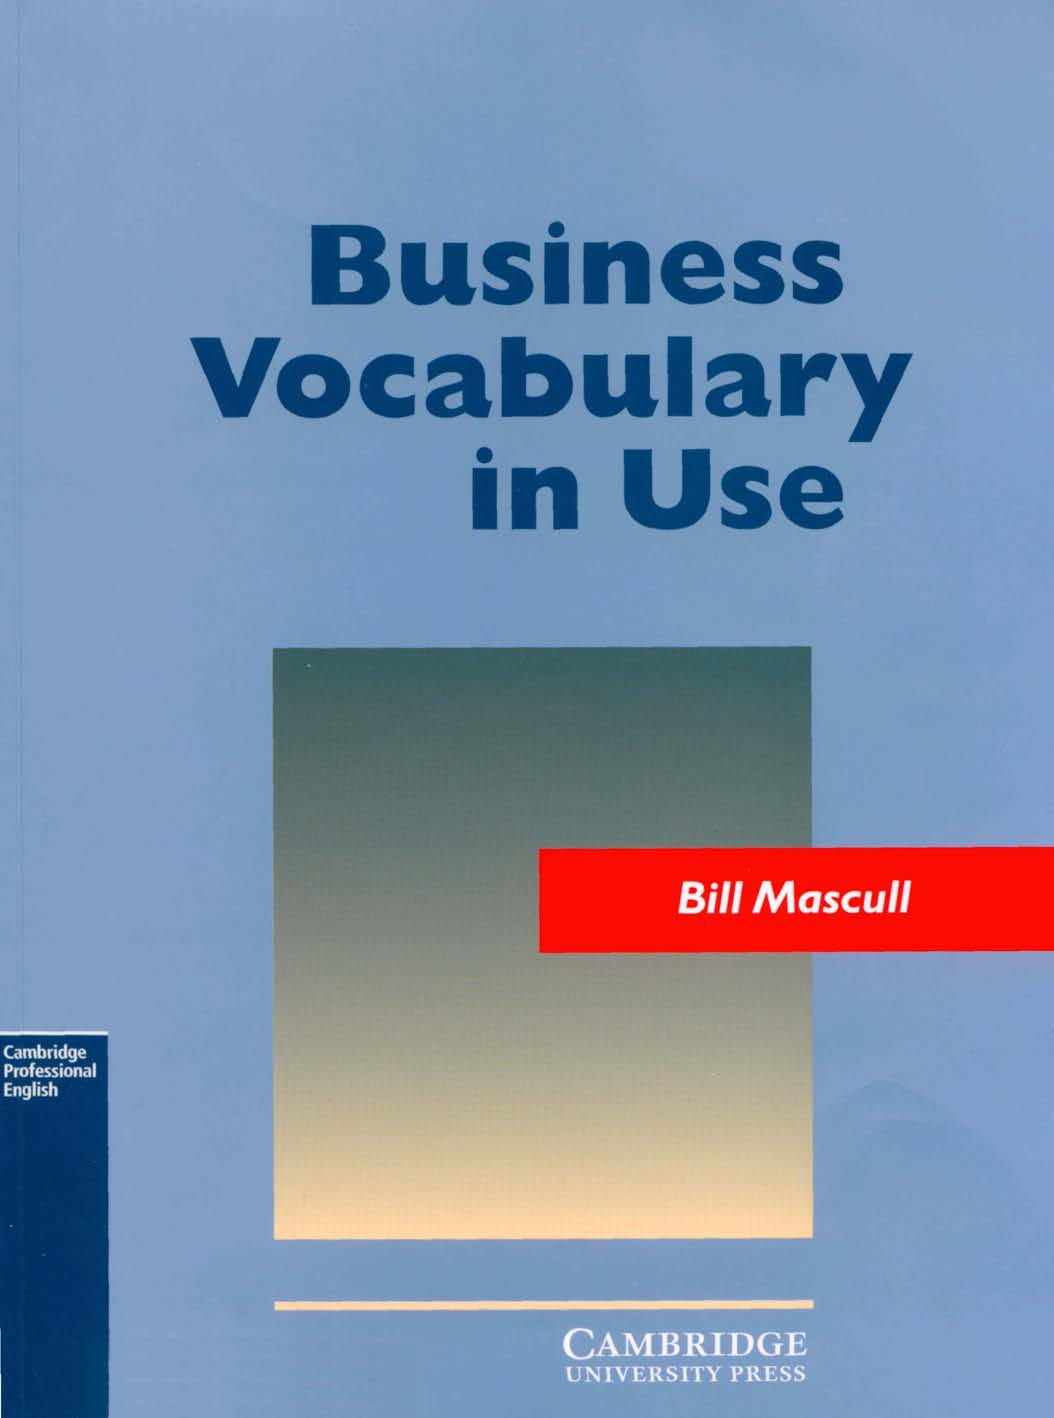 Business Vocabulary In Use (Cambridge Professional English)